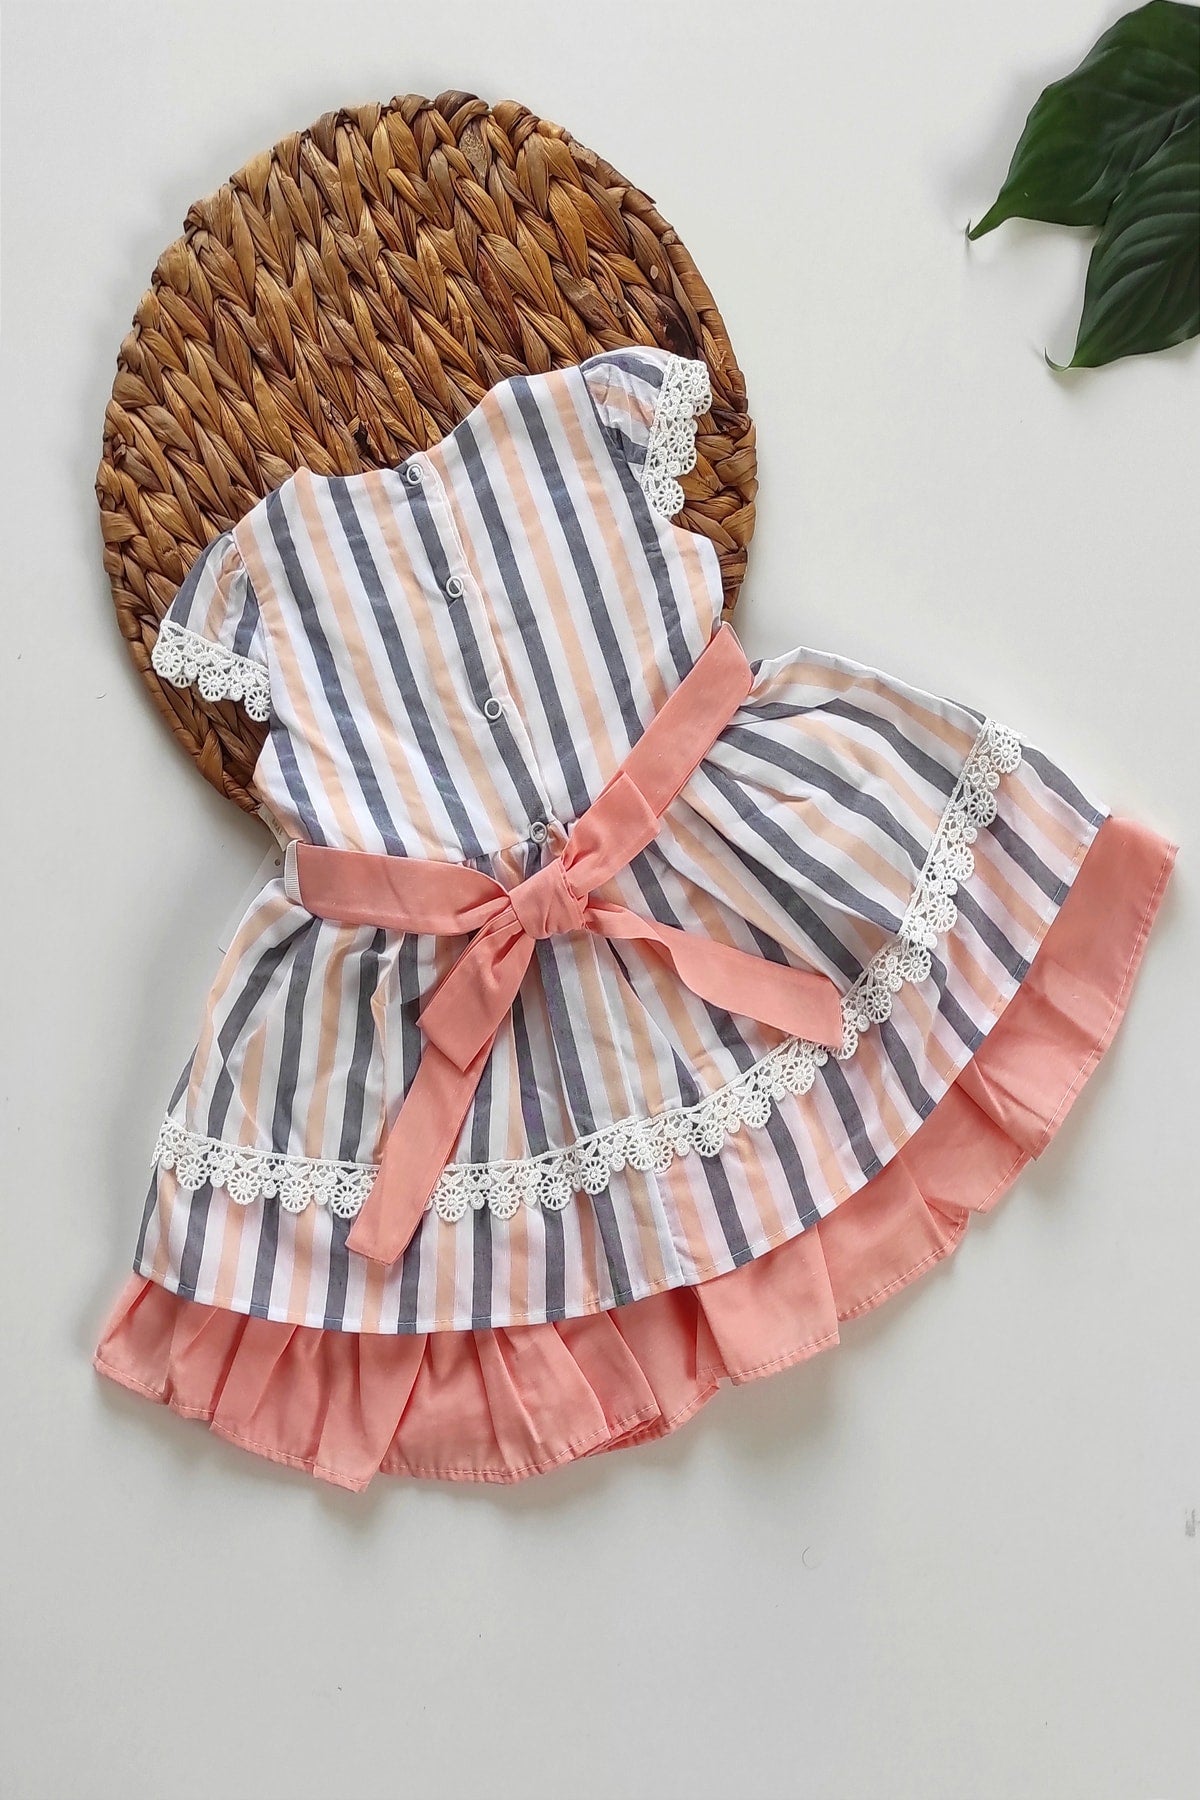 Baby Girl Girl Summer Dress Short Sleeve Lined Baby Suit infant clothing